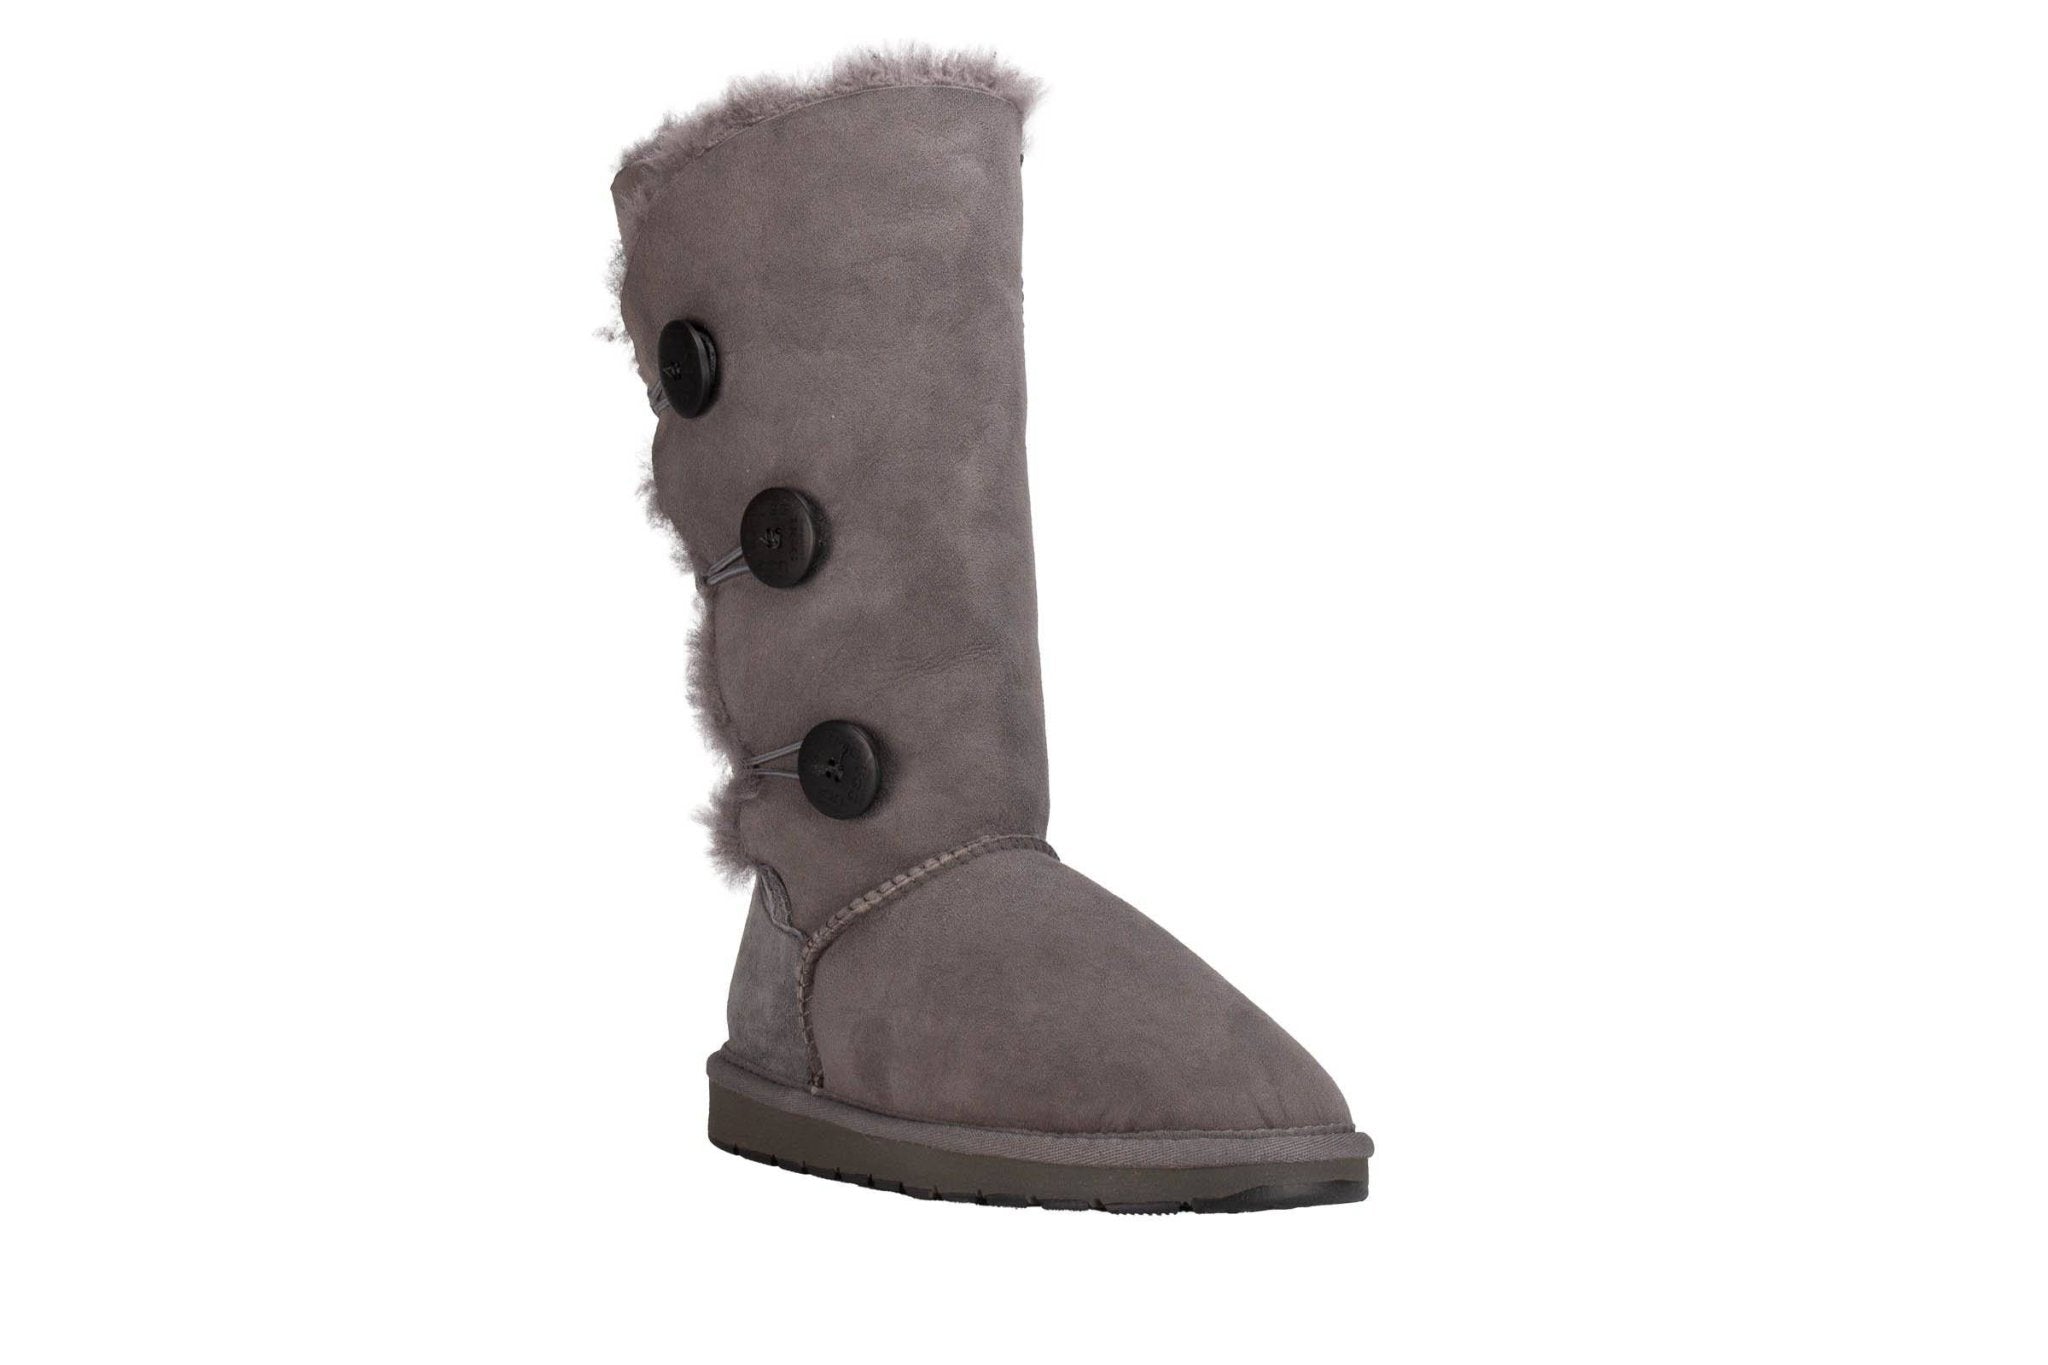 Classic Tall Buttons - SHEARERS UGG